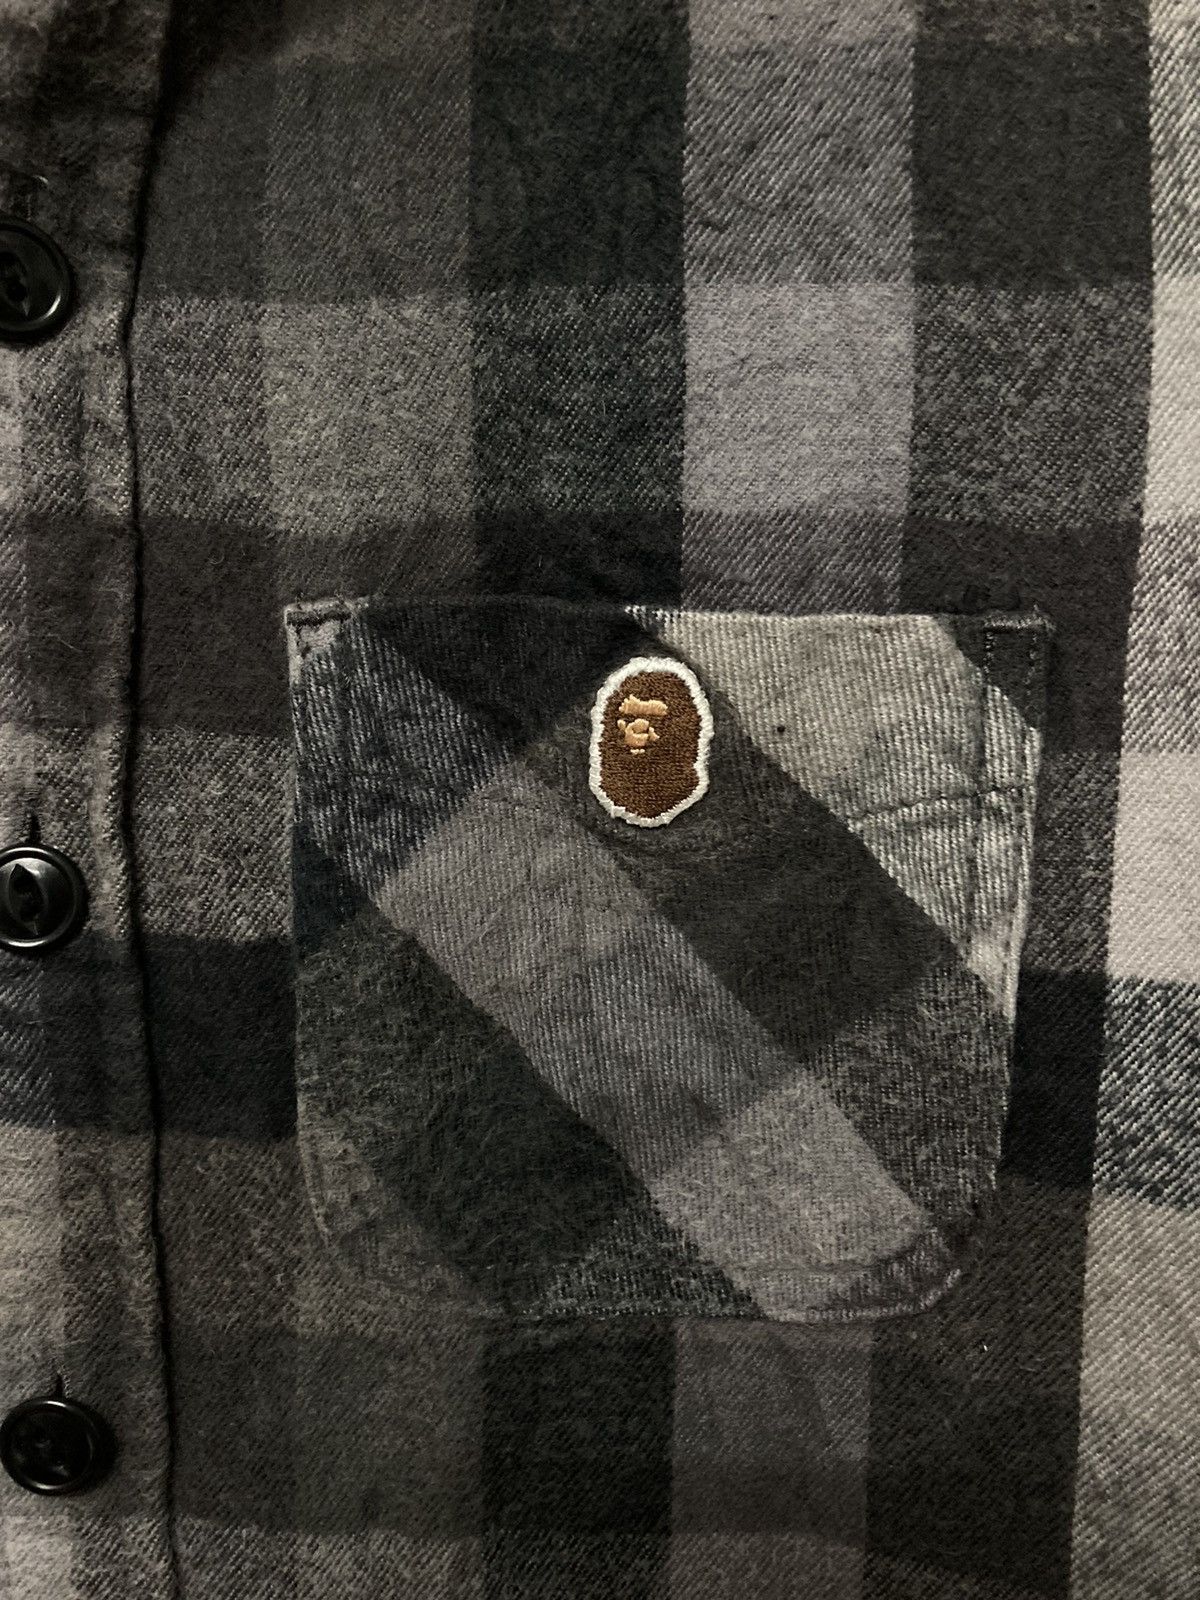 Bape Button Up Checker Flannel Shirt Made in Japan - 6